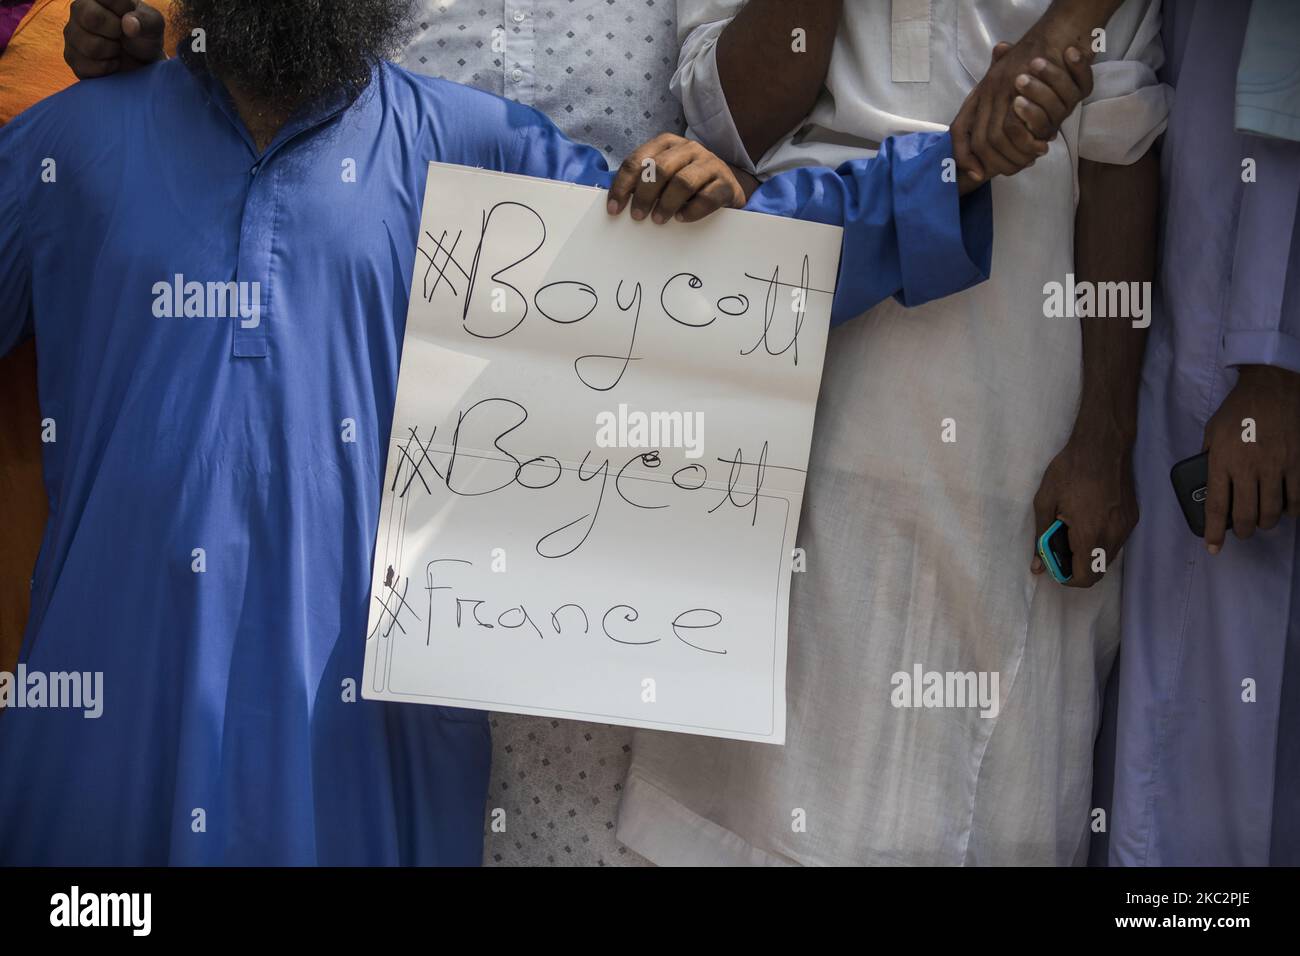 Activists and supporters of the Islami Andolon Bangladesh, a Islamist political party, hold a protest march calling for the boycott of French products and denouncing French president Emmanuel Macron for his comments over Prophet Mohammed caricatures, in Dhaka on October 27, 2020. (Photo by Ahmed Salahuddin/NurPhoto) Stock Photo